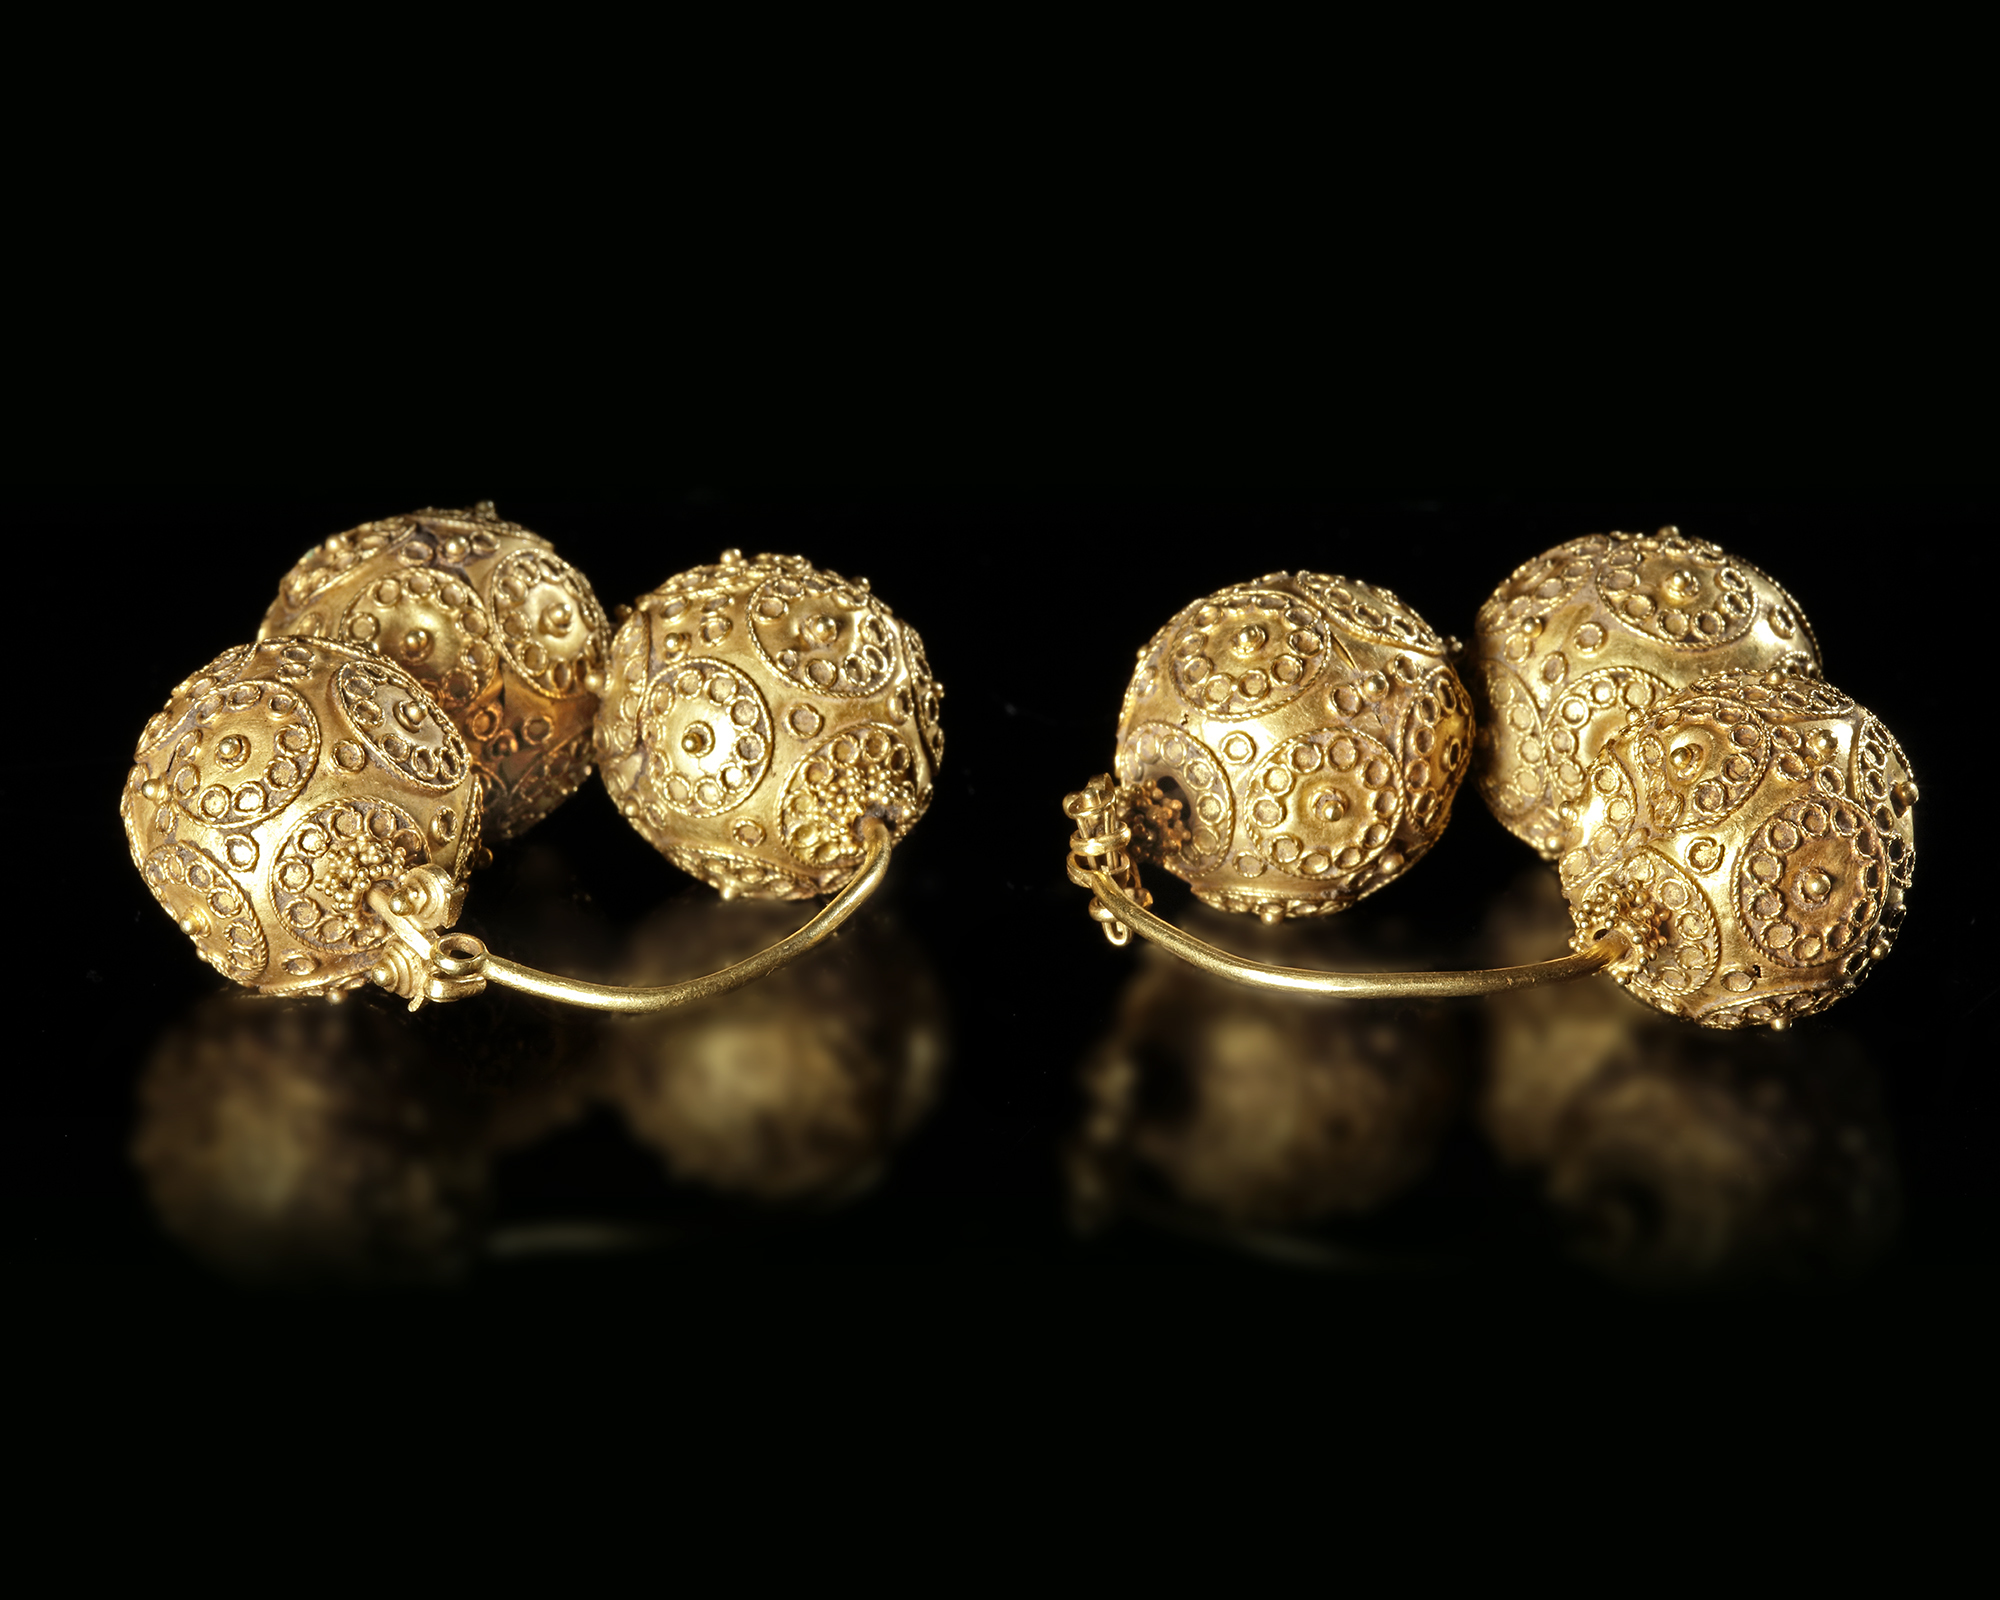 A PAIR OF EARLY ISLAMIC GOLD EARRINGS, 12TH CENTURY - Image 5 of 6